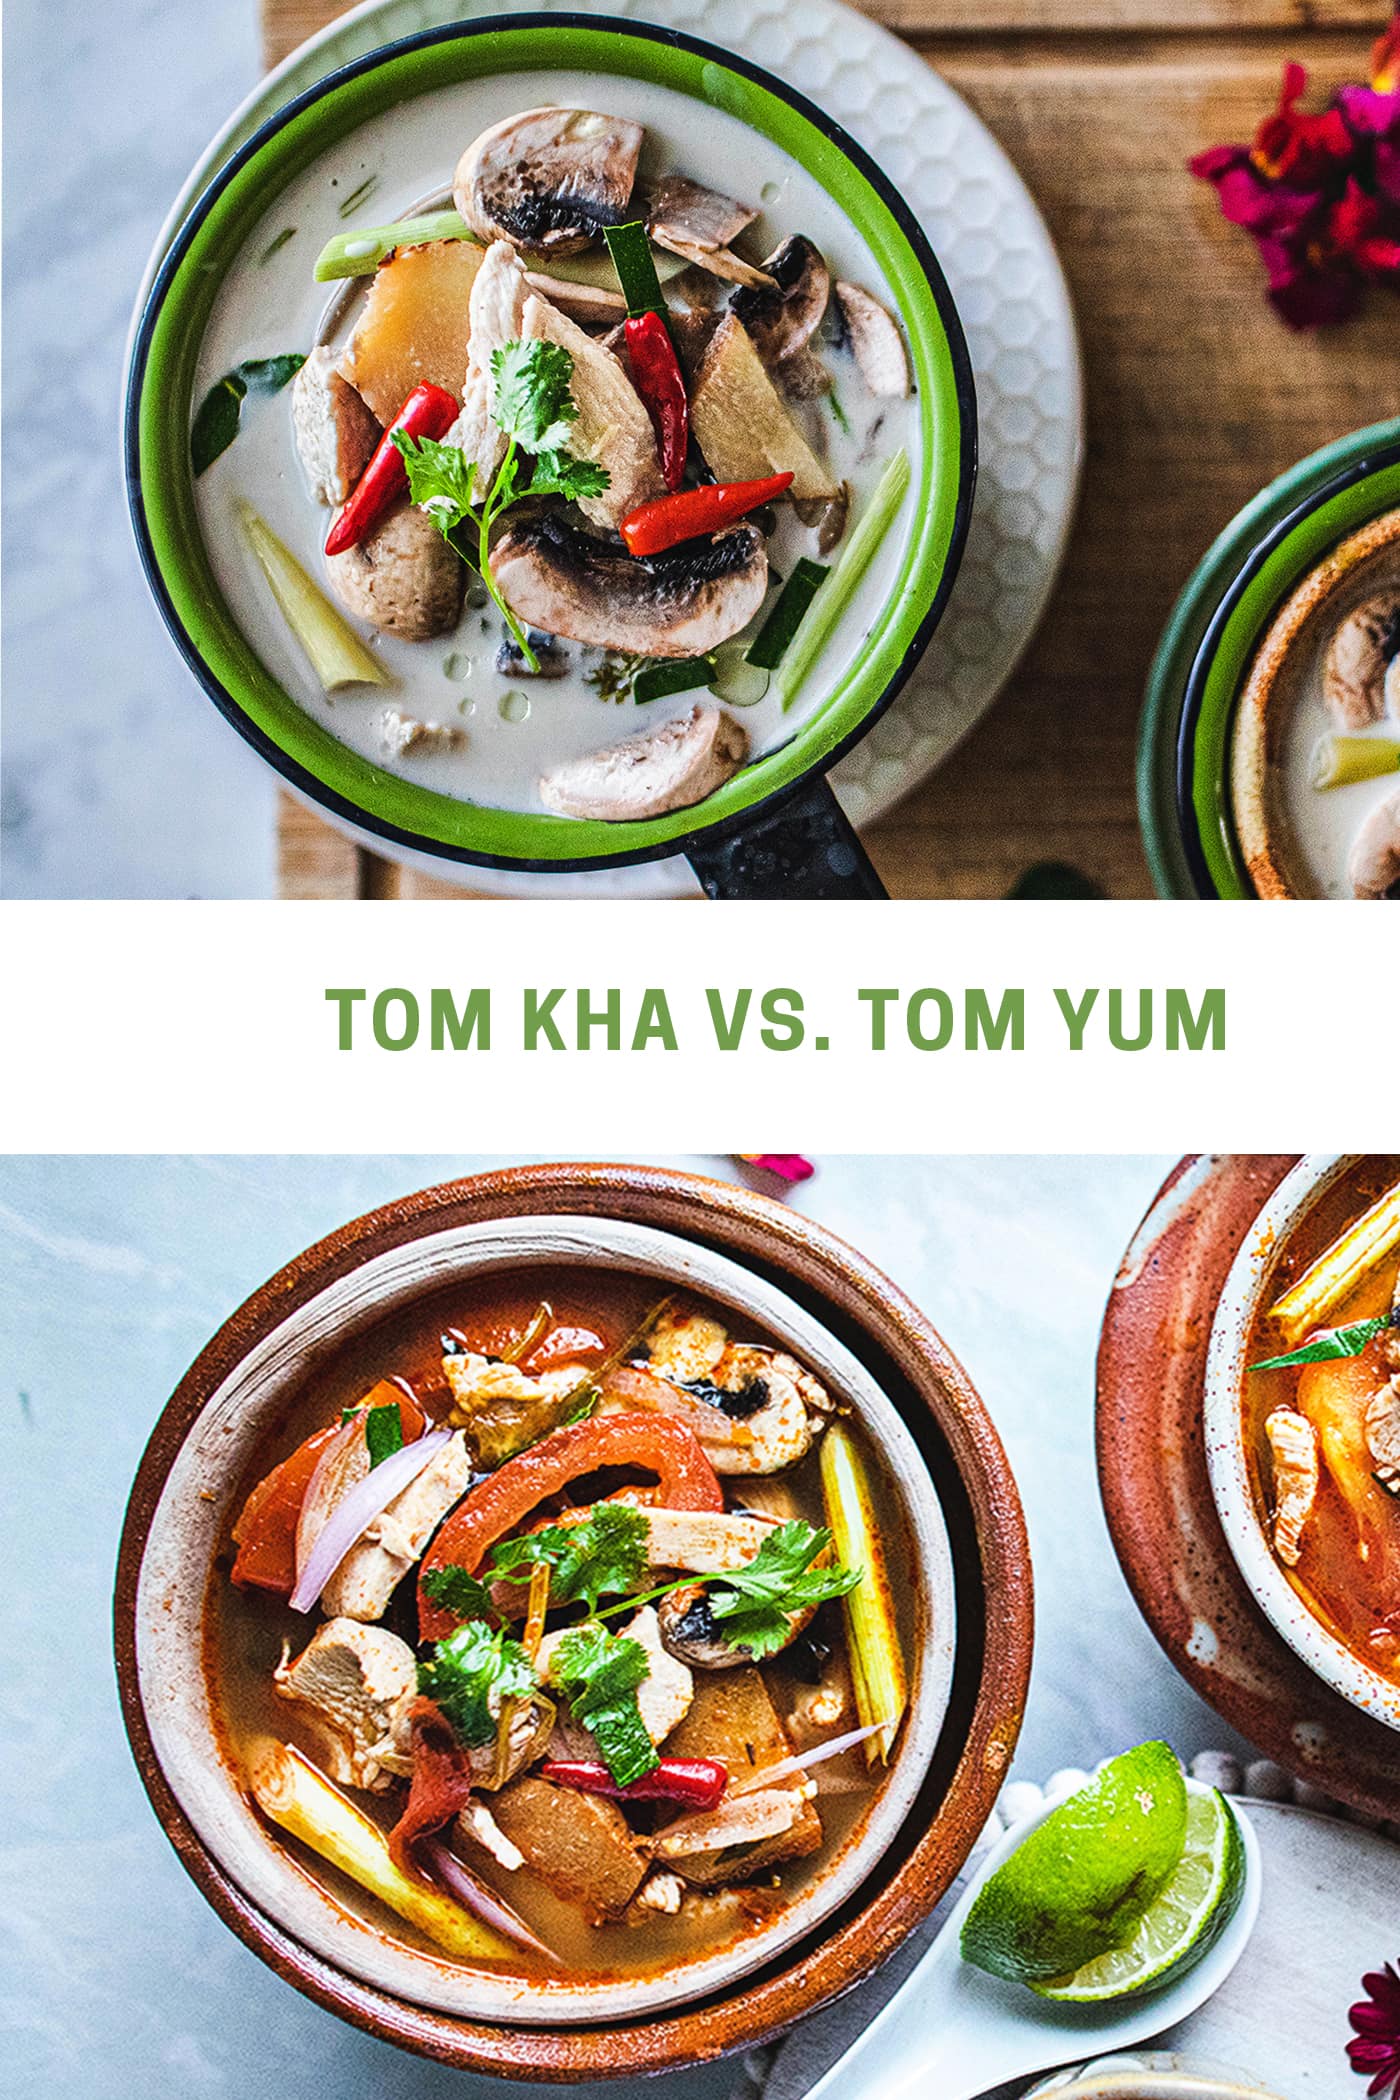 There’s just a couple of minor differences between Tom Kha Gai and Tom Yum Soup. The addition of coconut milk to Tom Kha soup is the primary distinction, although you can also make Tom Yum Soup with coconut milk. Tom Yum is also more spicy from the addition of the Thai chili paste.#thaicoconutsoup #thaichickencoconutsoup #tomkhagai #thaicoconutchickensoup #easythaisoup